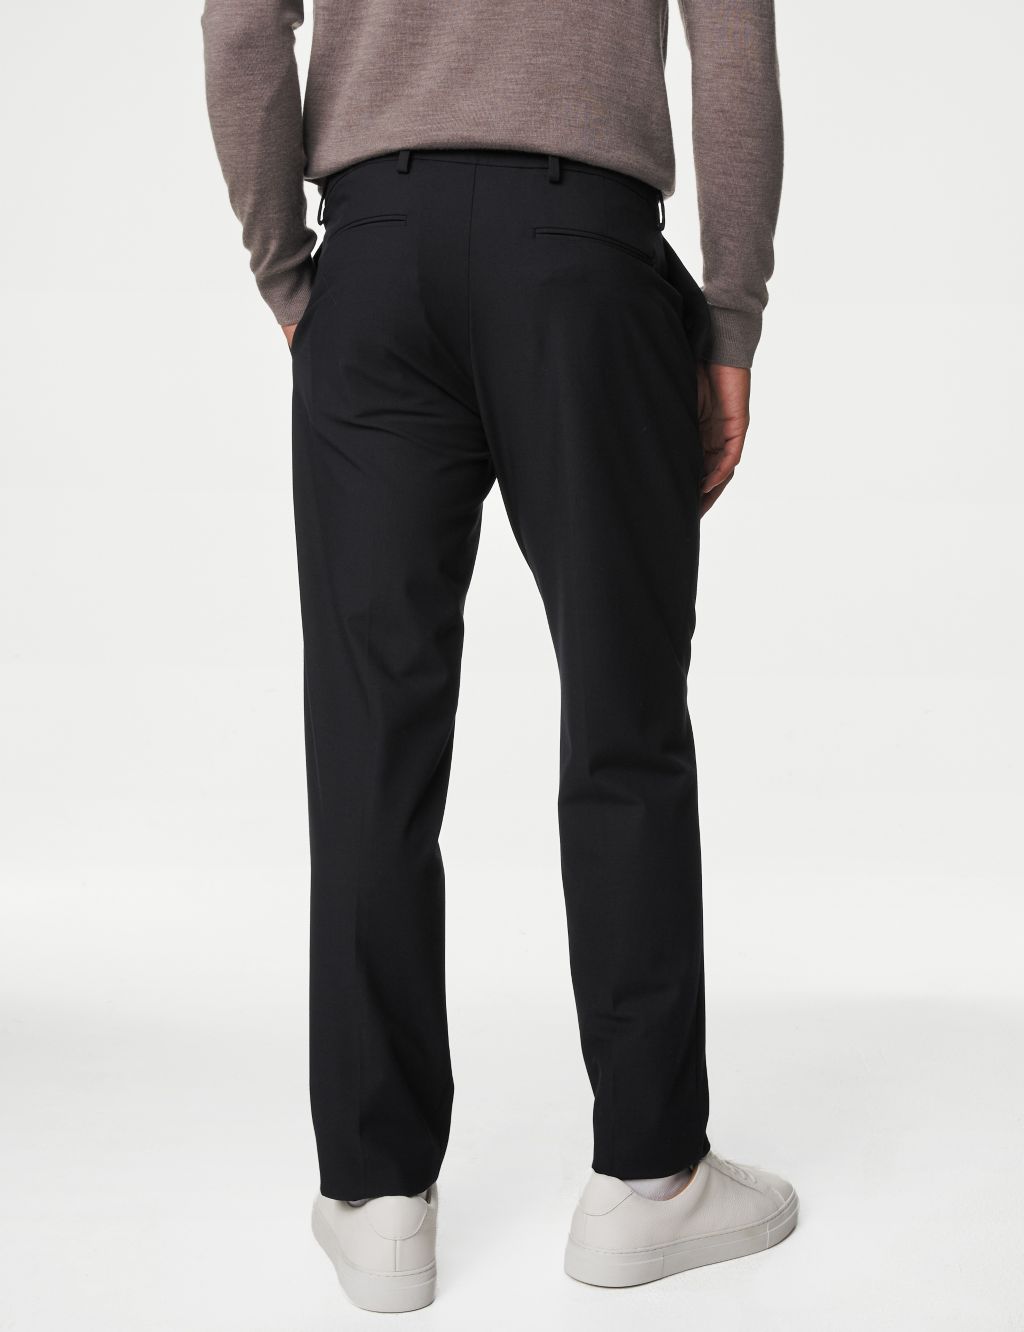 Twin Pleat Stretch Trousers | Autograph | M&S